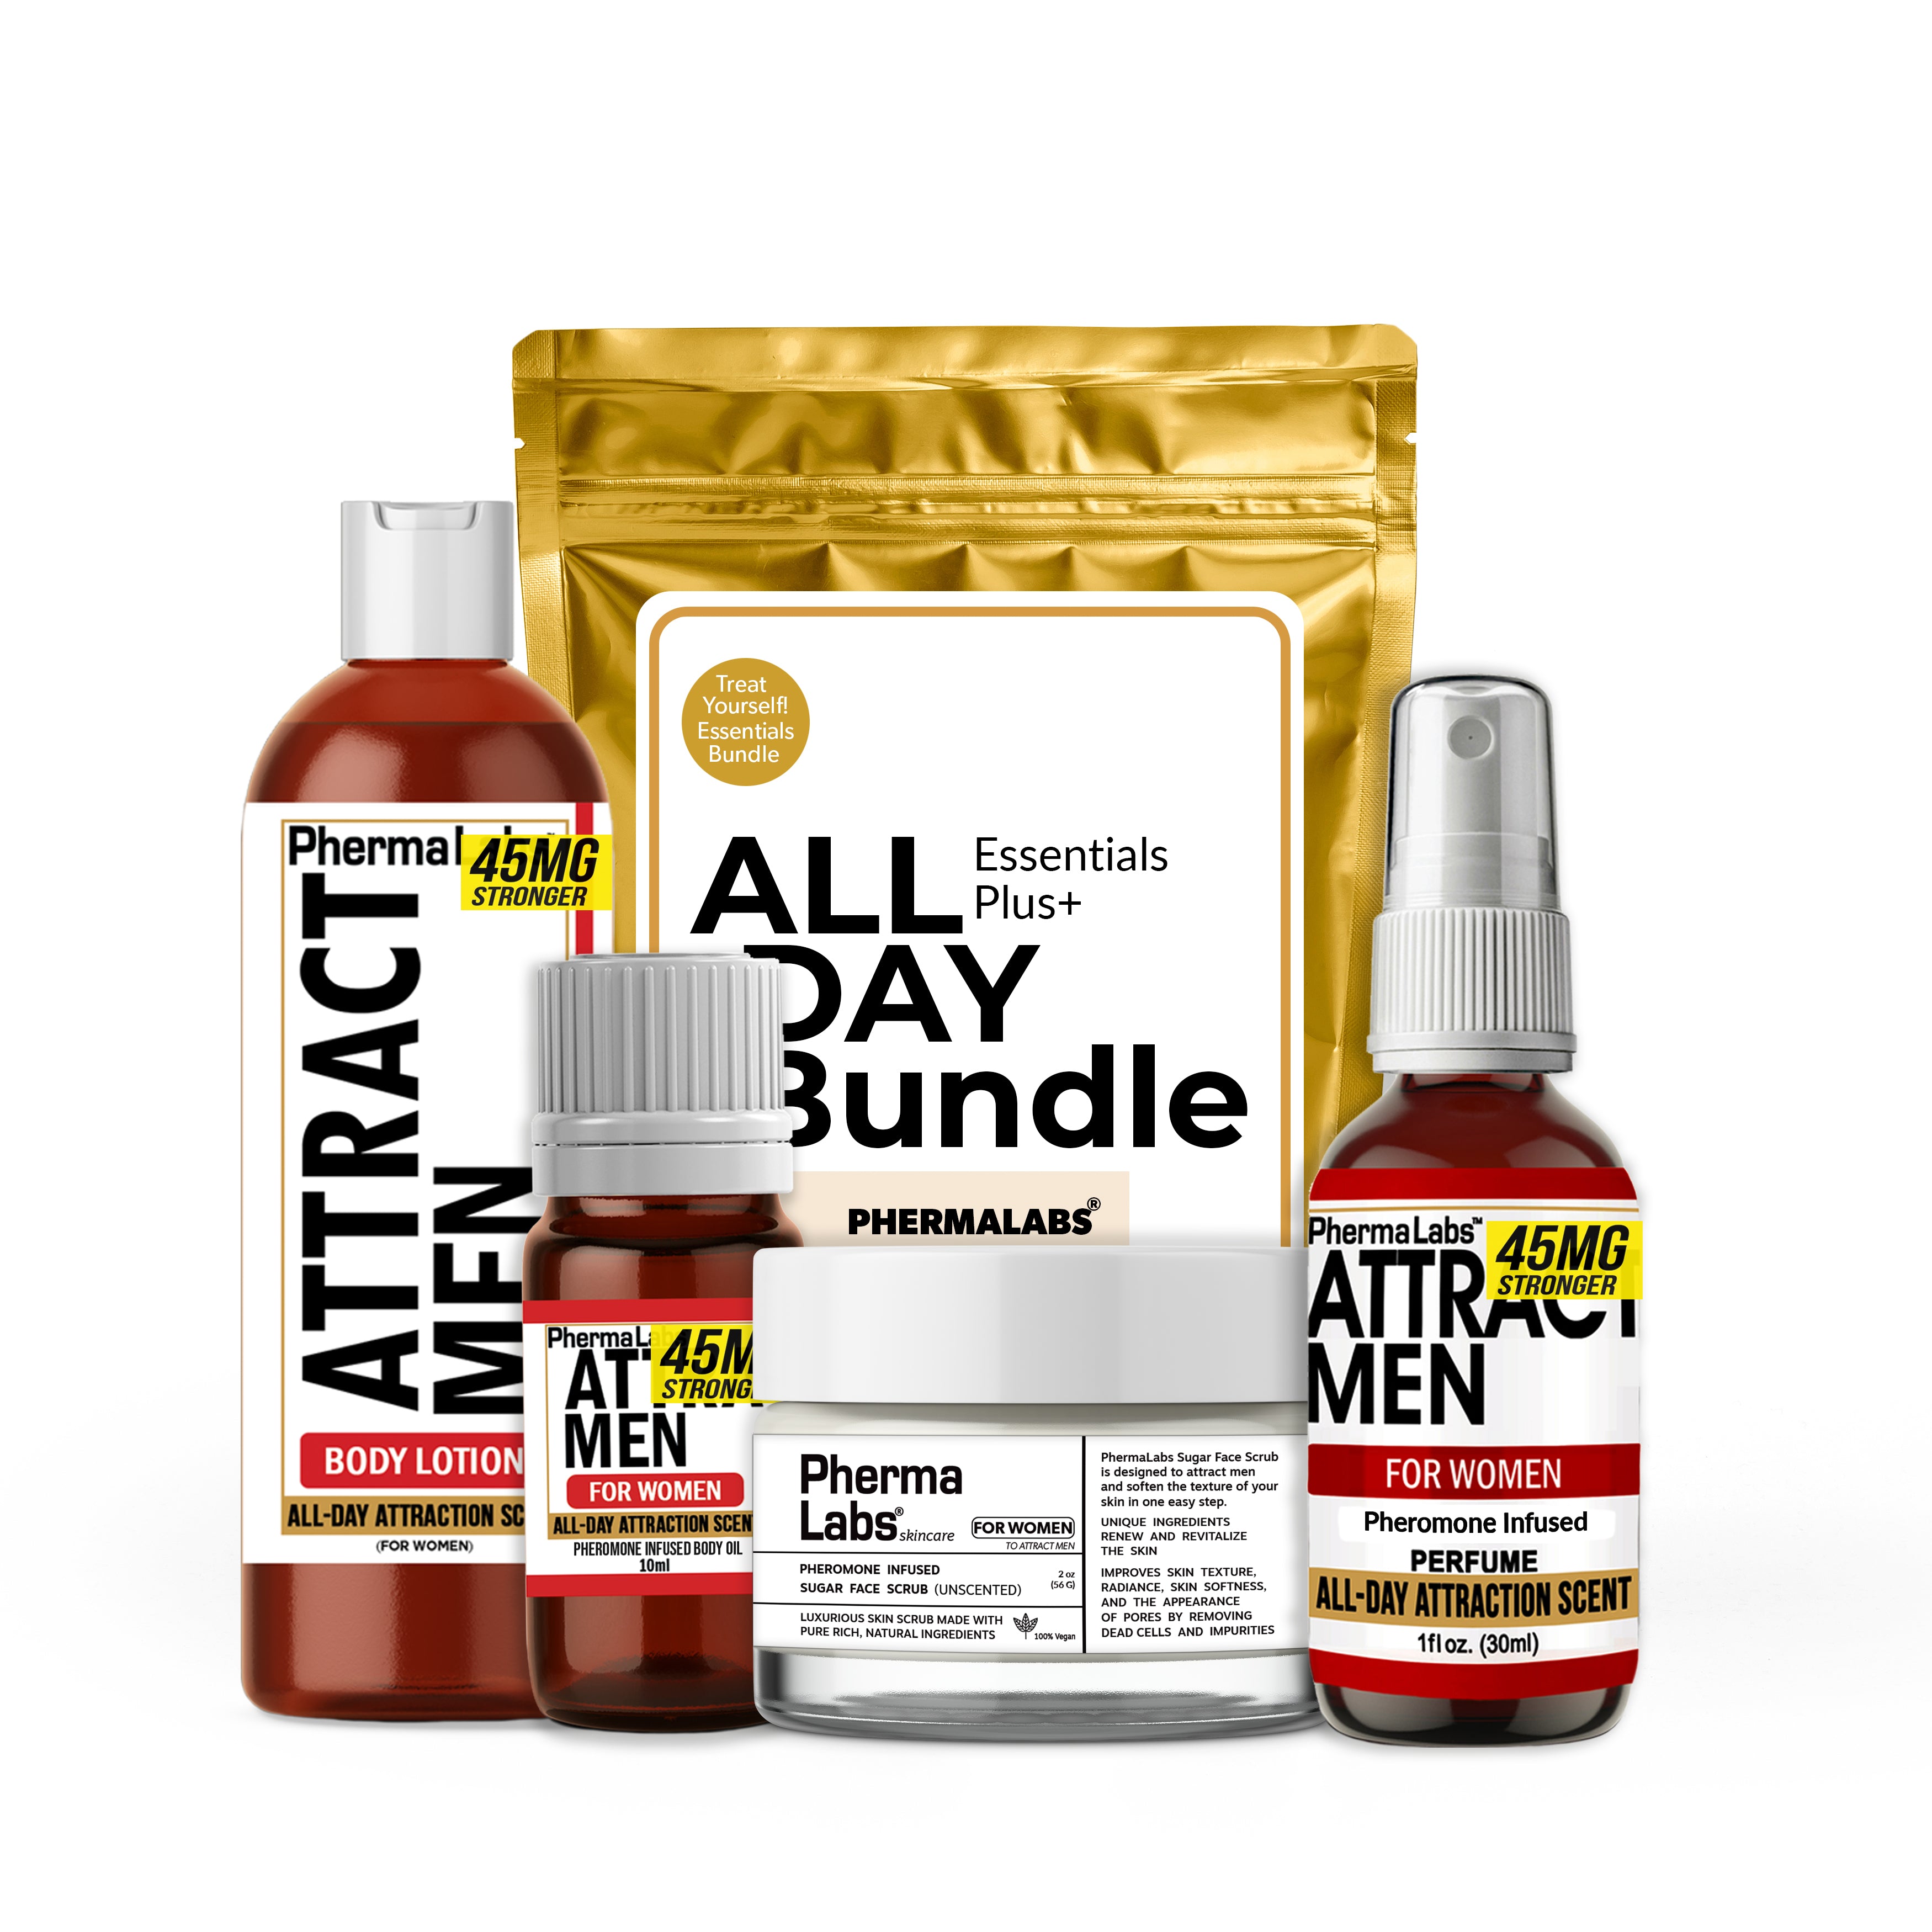 ALL DAY Pheromone Perfume Essentials Bundle for Her [Attract Men]